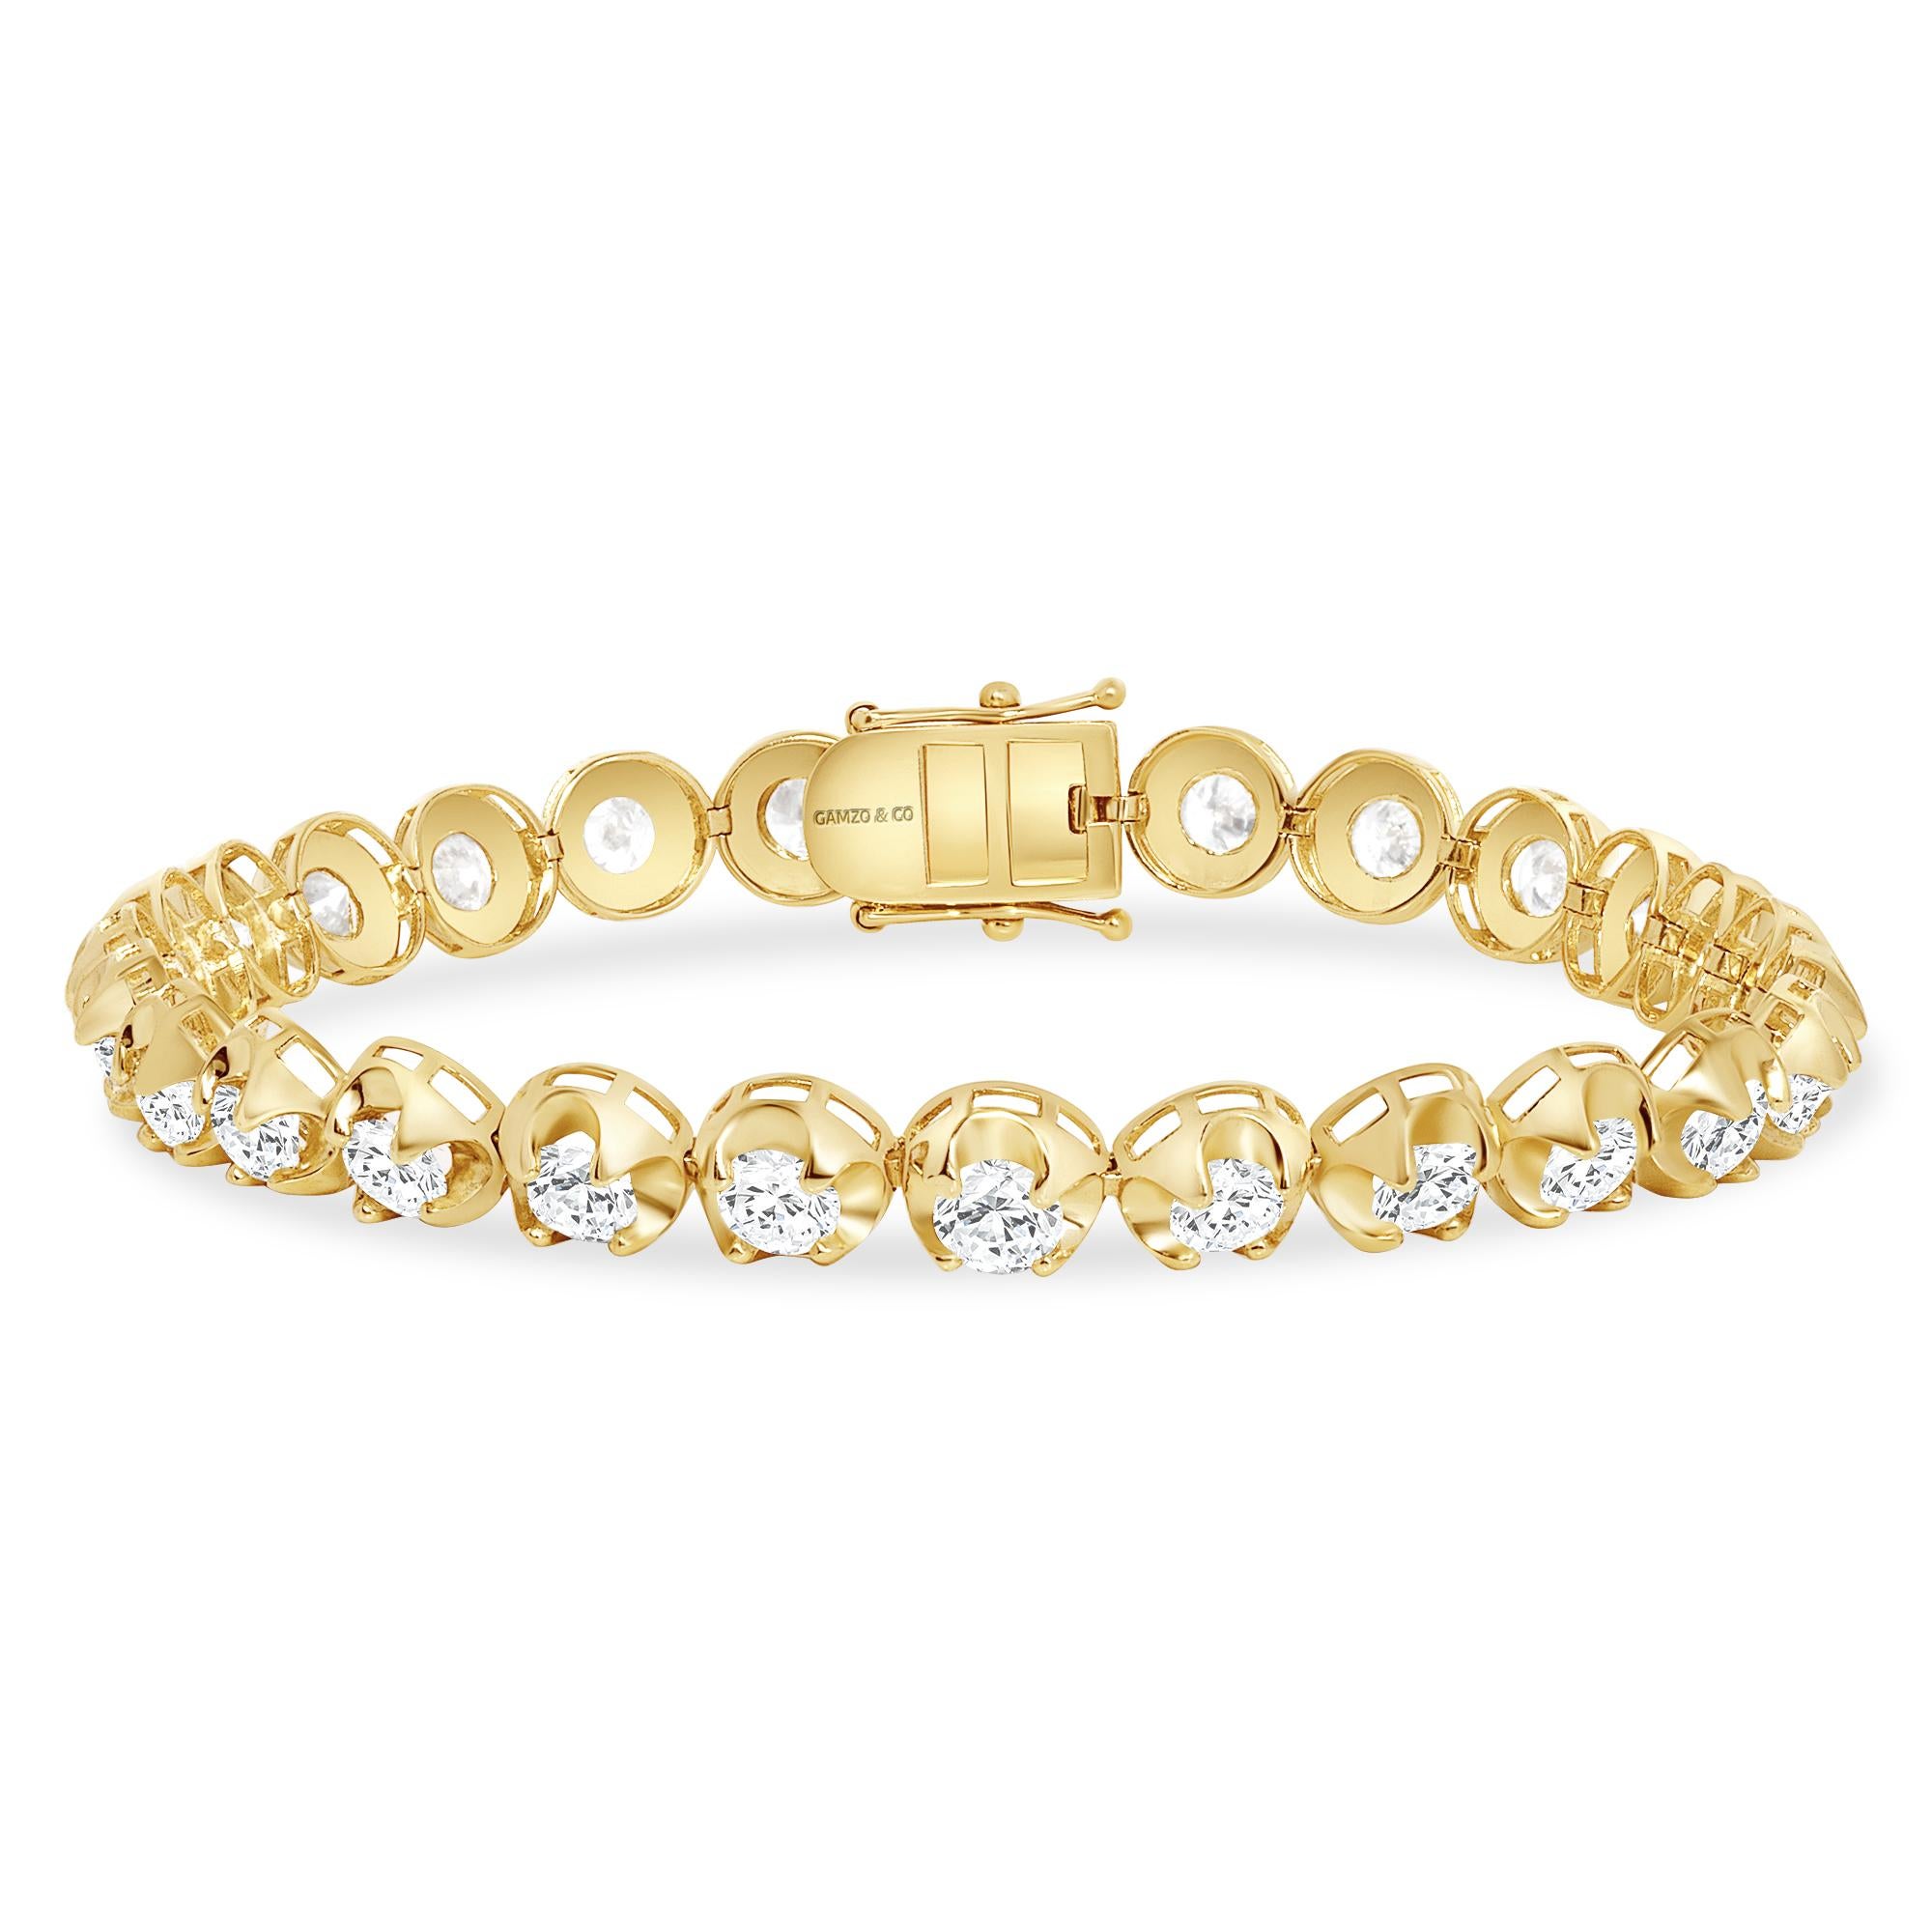 These beautiful round diamonds dance around your wrist as they absorb light and attention.
Metal: 14k Gold
Diamond Cut: Round
Diamond Total Carats: 7ct
Diamond Clarity: VS
Diamond Color: F
Color: Yellow Gold
Bracelet Length: 8.5 Inches 
Included